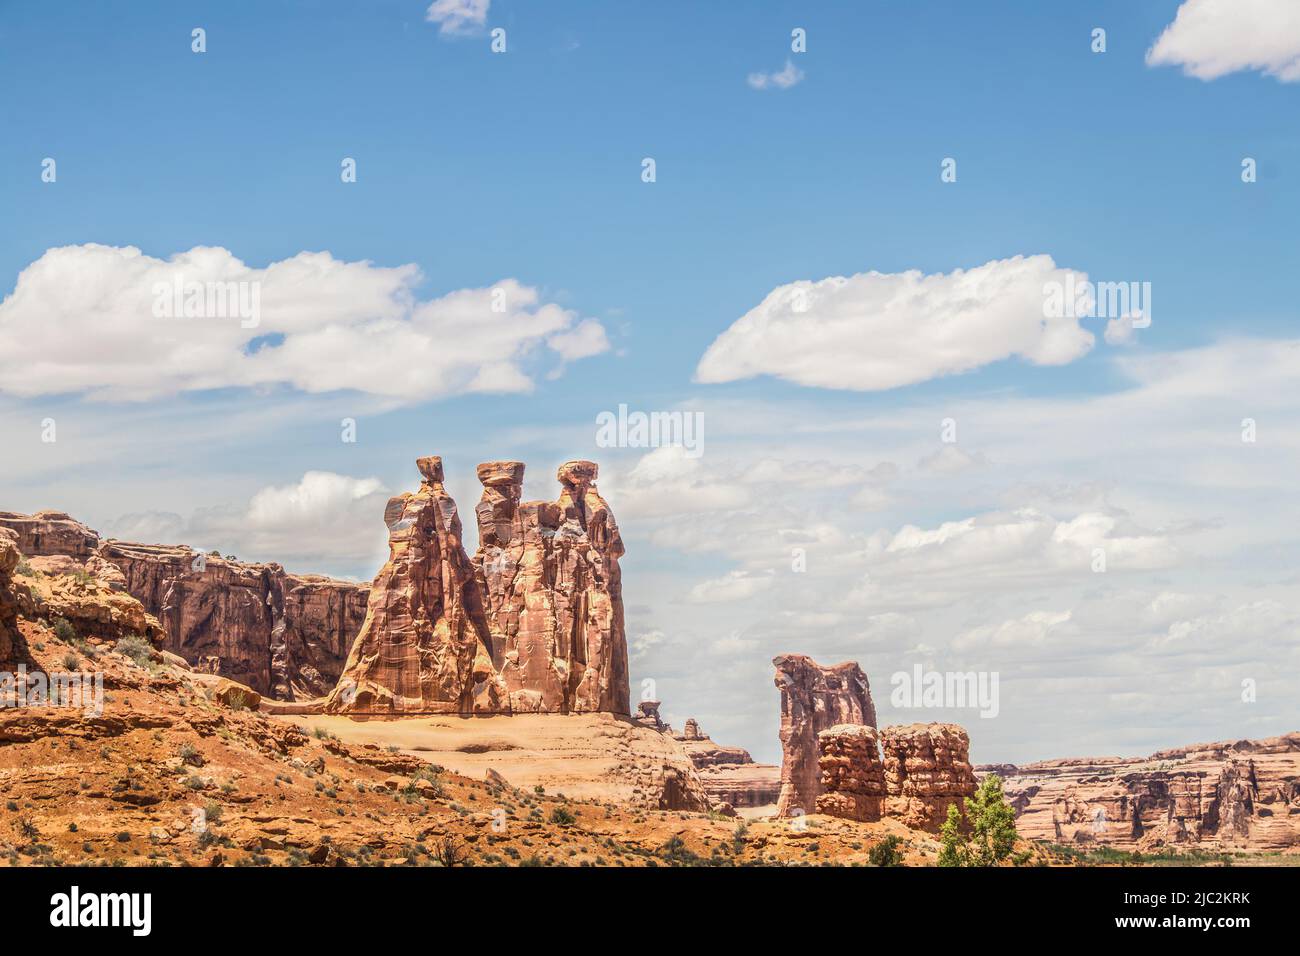 Hoodoo rock formations at Arches National Park Utah USA that look like giant aliens having a conversation Stock Photo